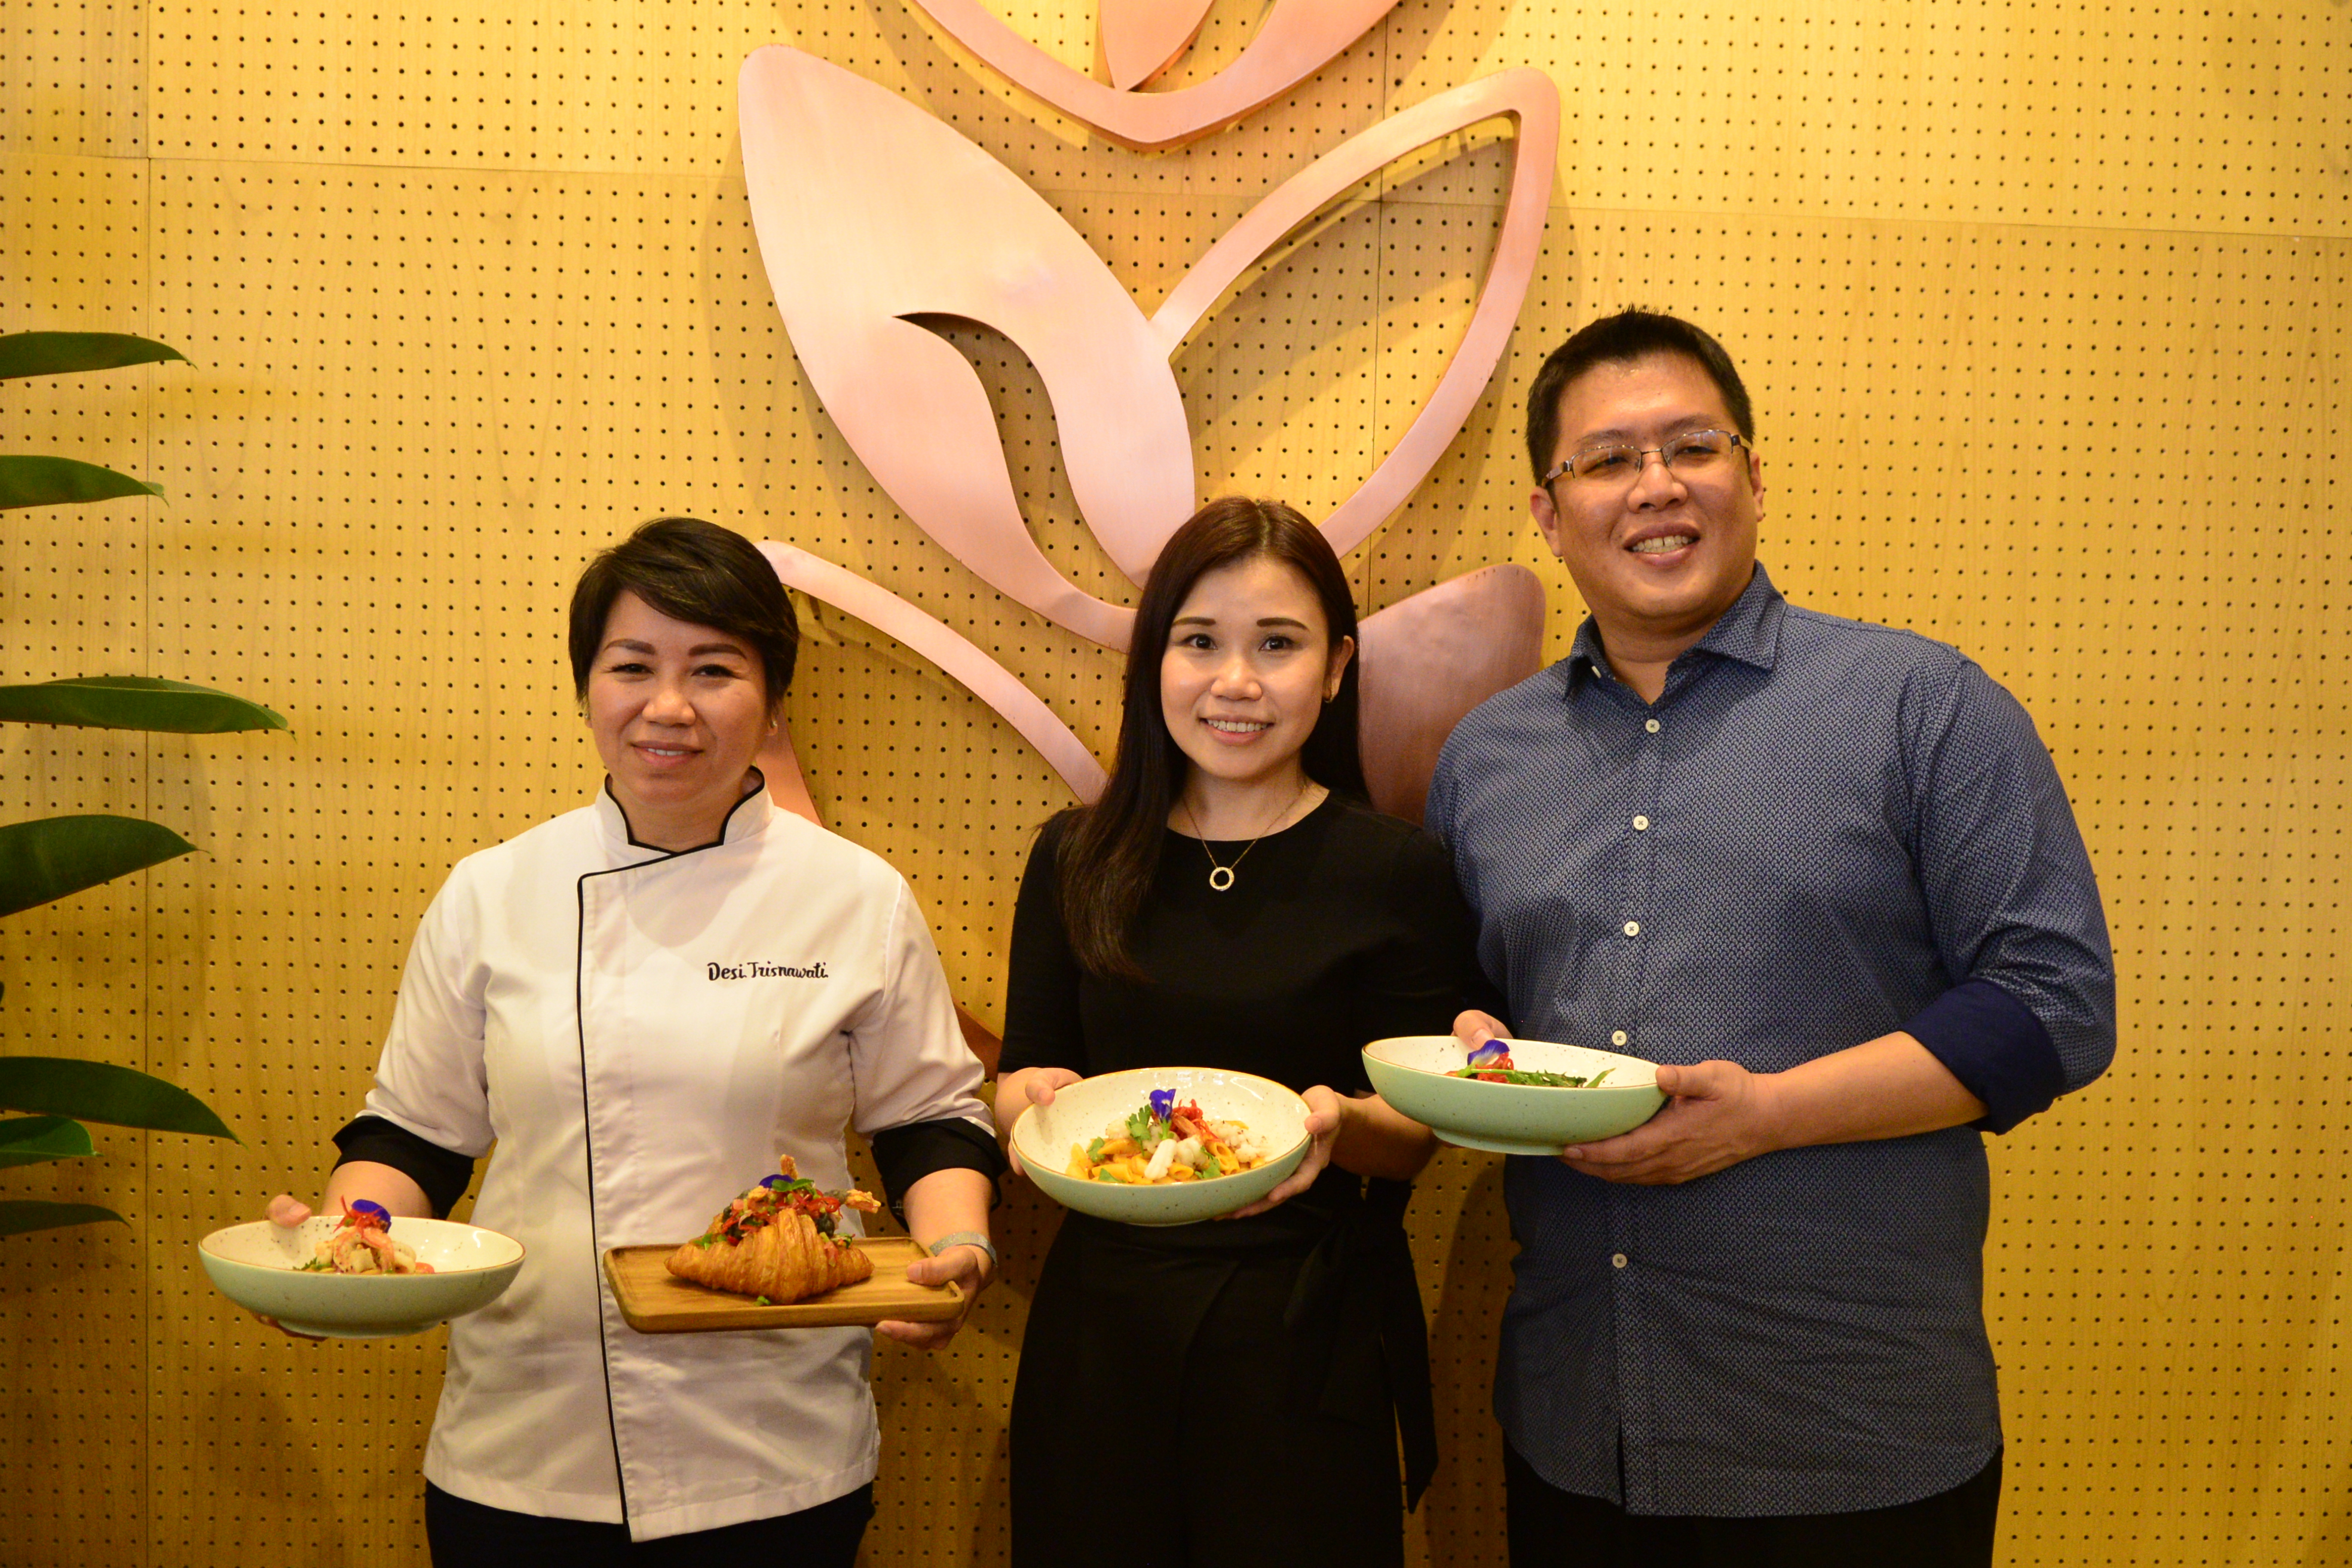 Chef Desi Trisnawati (left), Joe & Dough co-founders Dawn Wee (center) and Damien Koh (right) present four new dishes to mark the opening of Joe & Dough's new branch at Gandaria City mall in South Jakarta on Sept. 24.